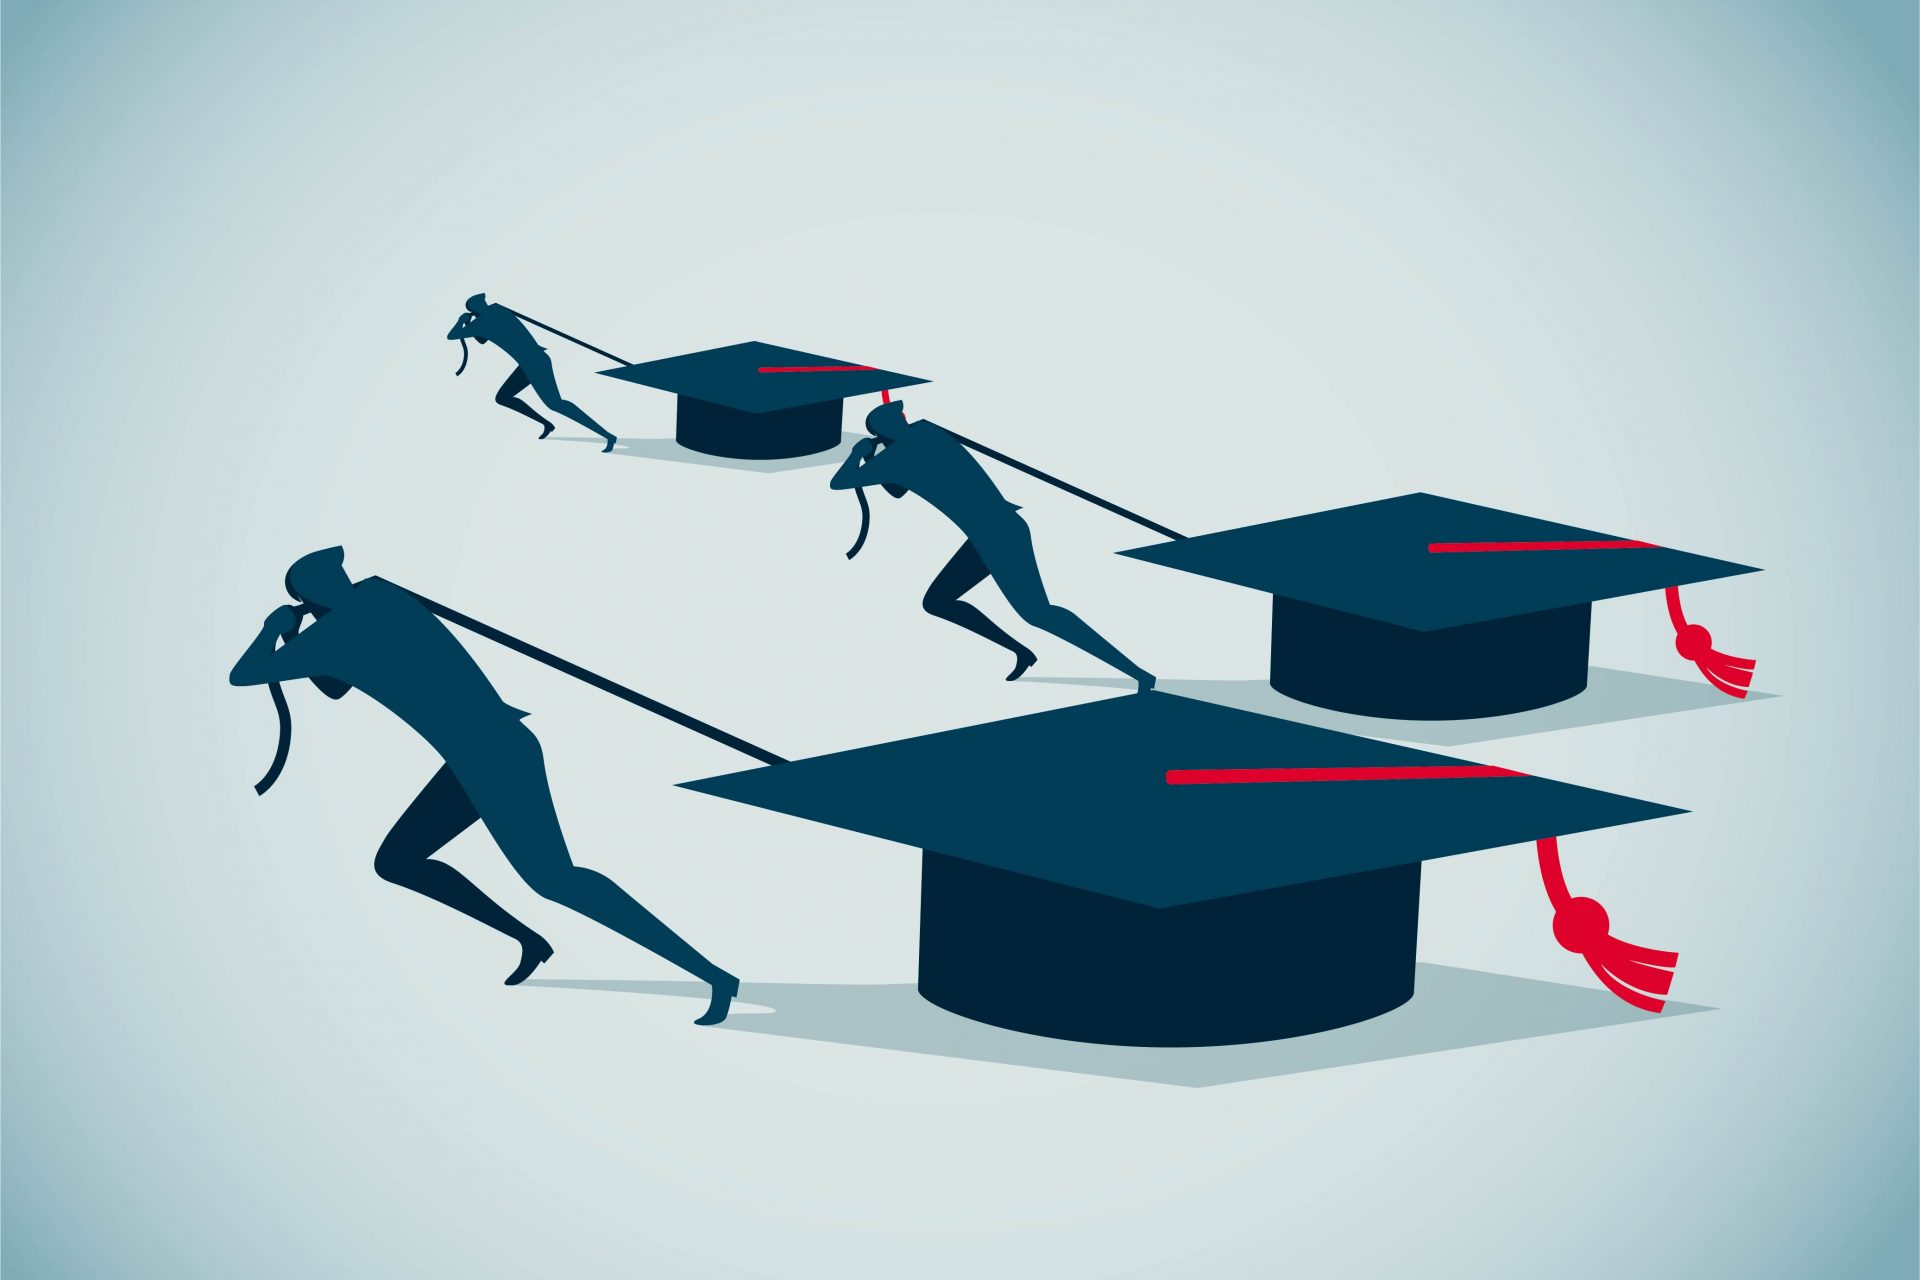 Are college degrees worth the debt and time?